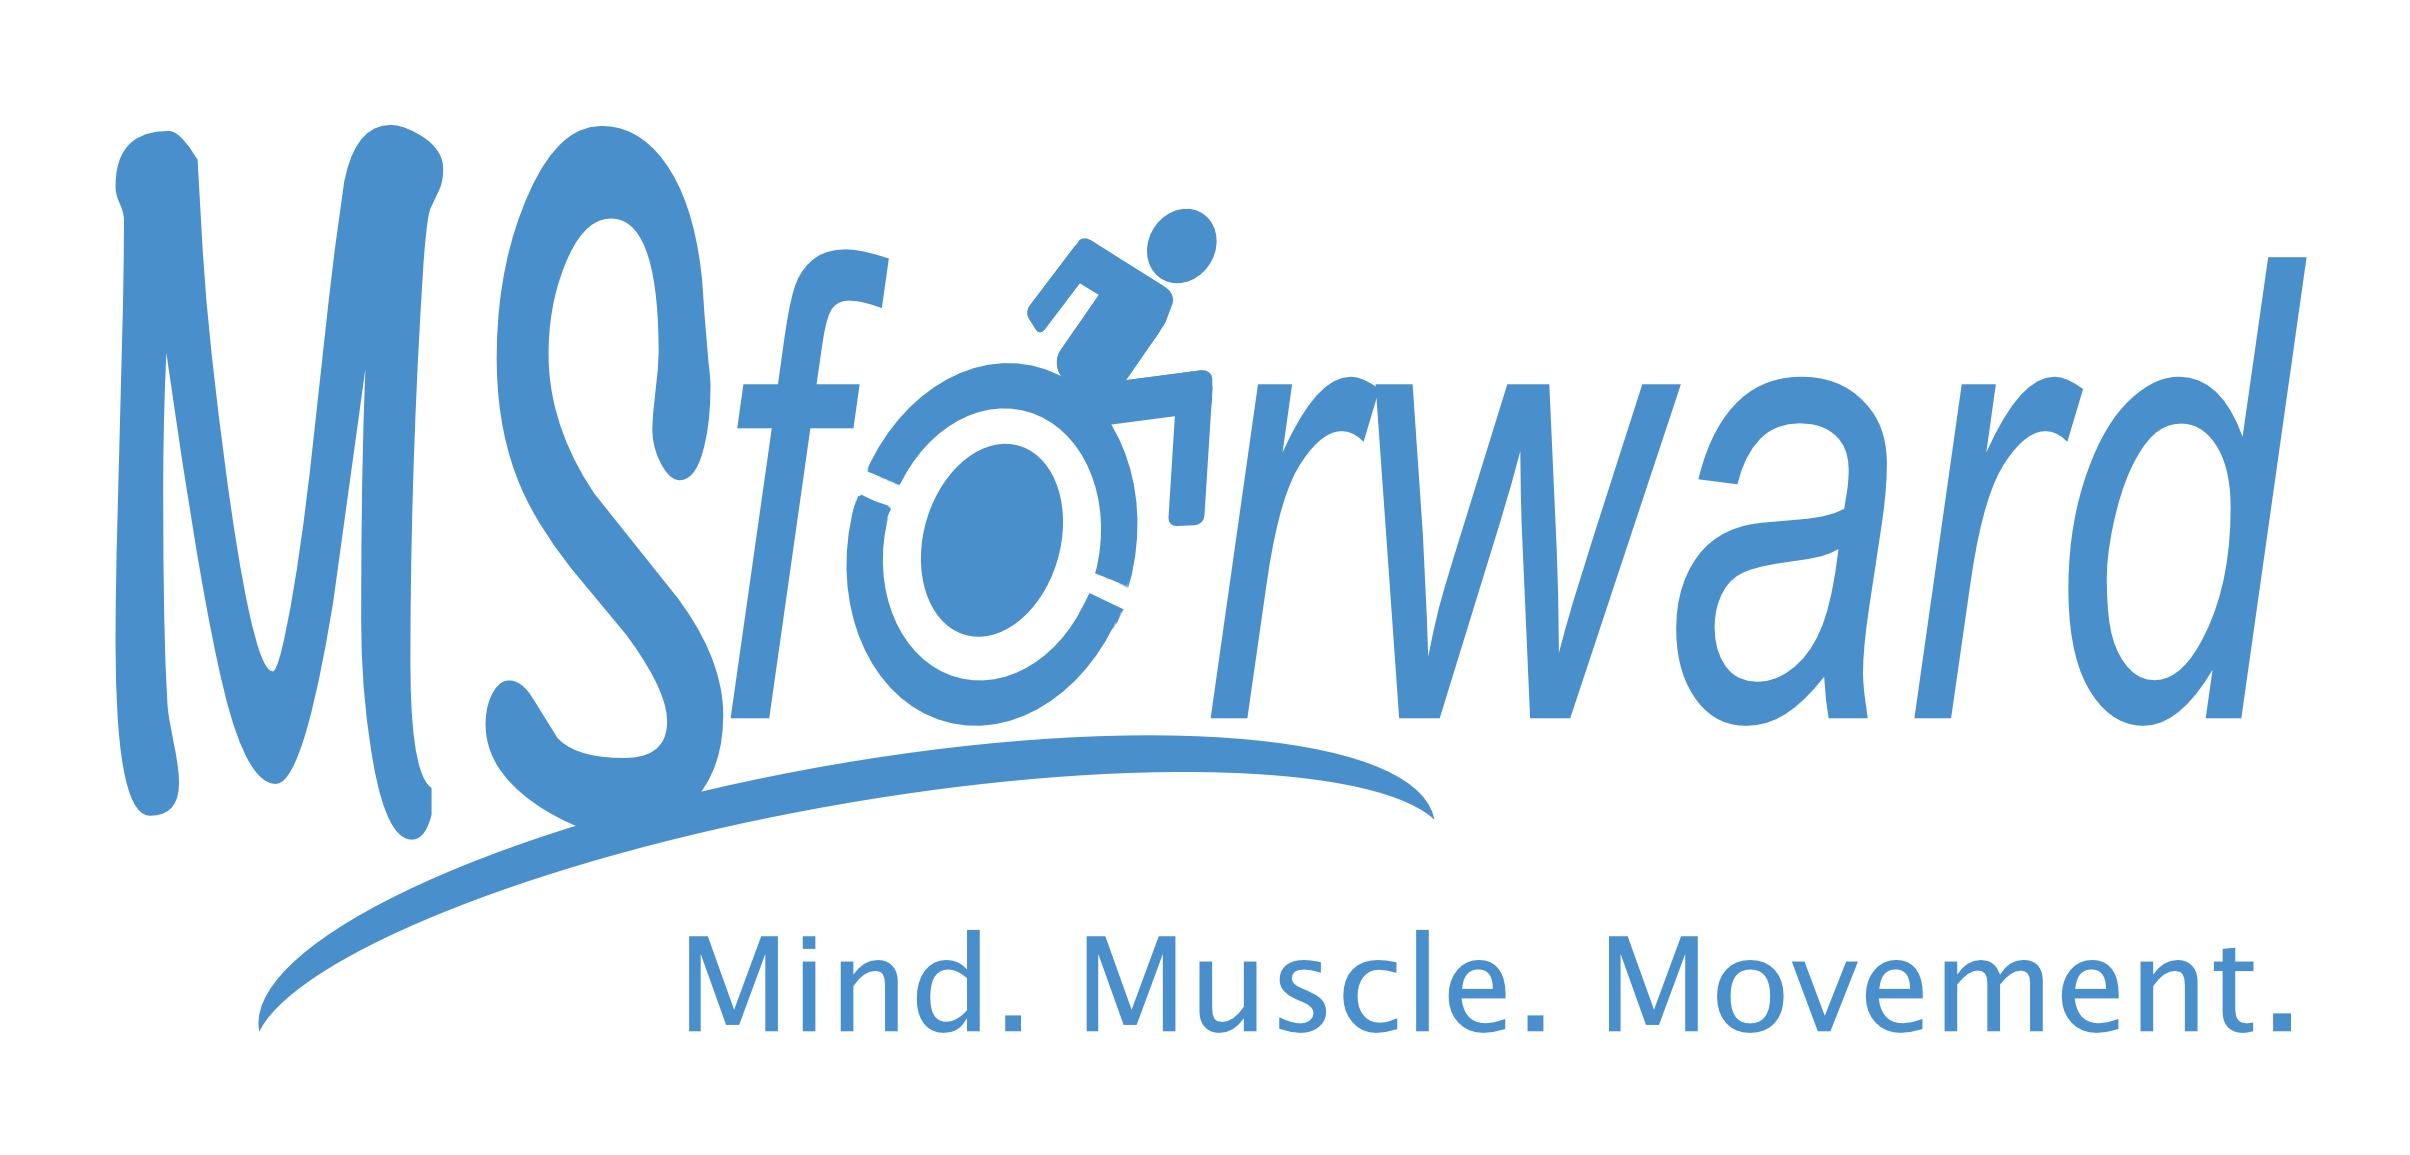 MSforward wellness center for individuals with MS and other chronic and Neuro conditions